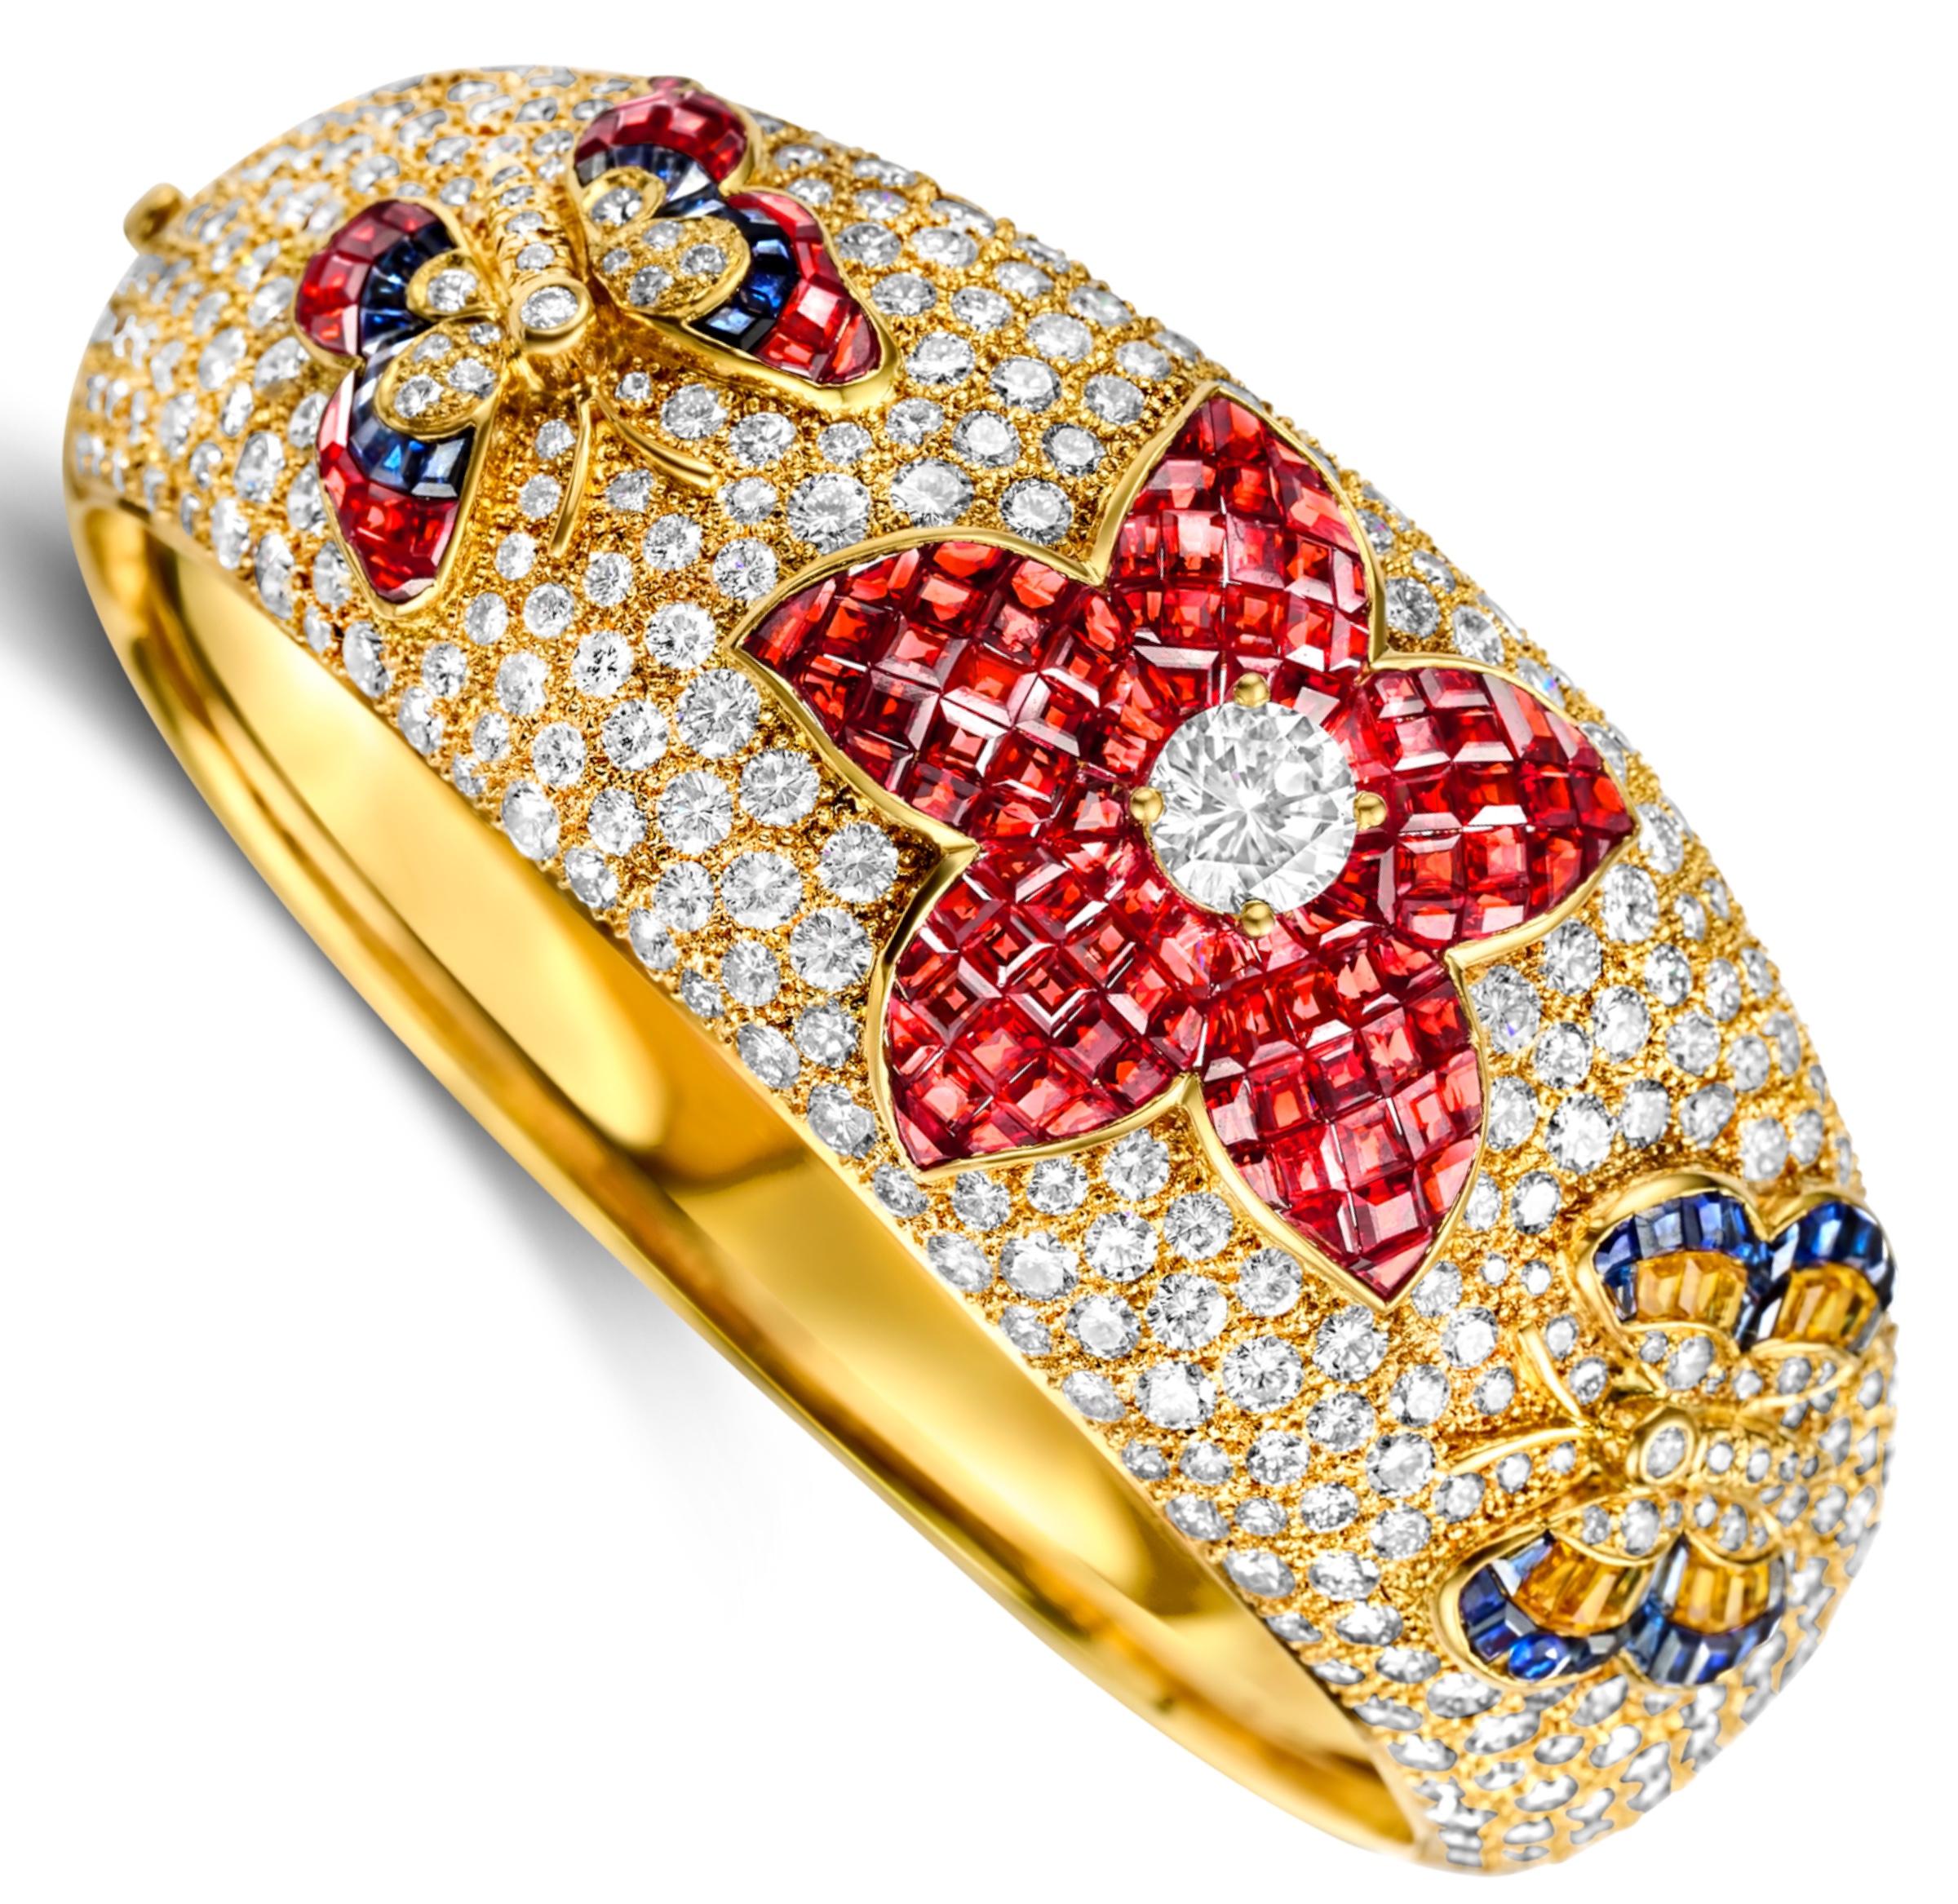 Artisan 18 kt. Yellow Gold Wide Bangle Bracelet With Diamonds, Rubies, Sapphires For Sale